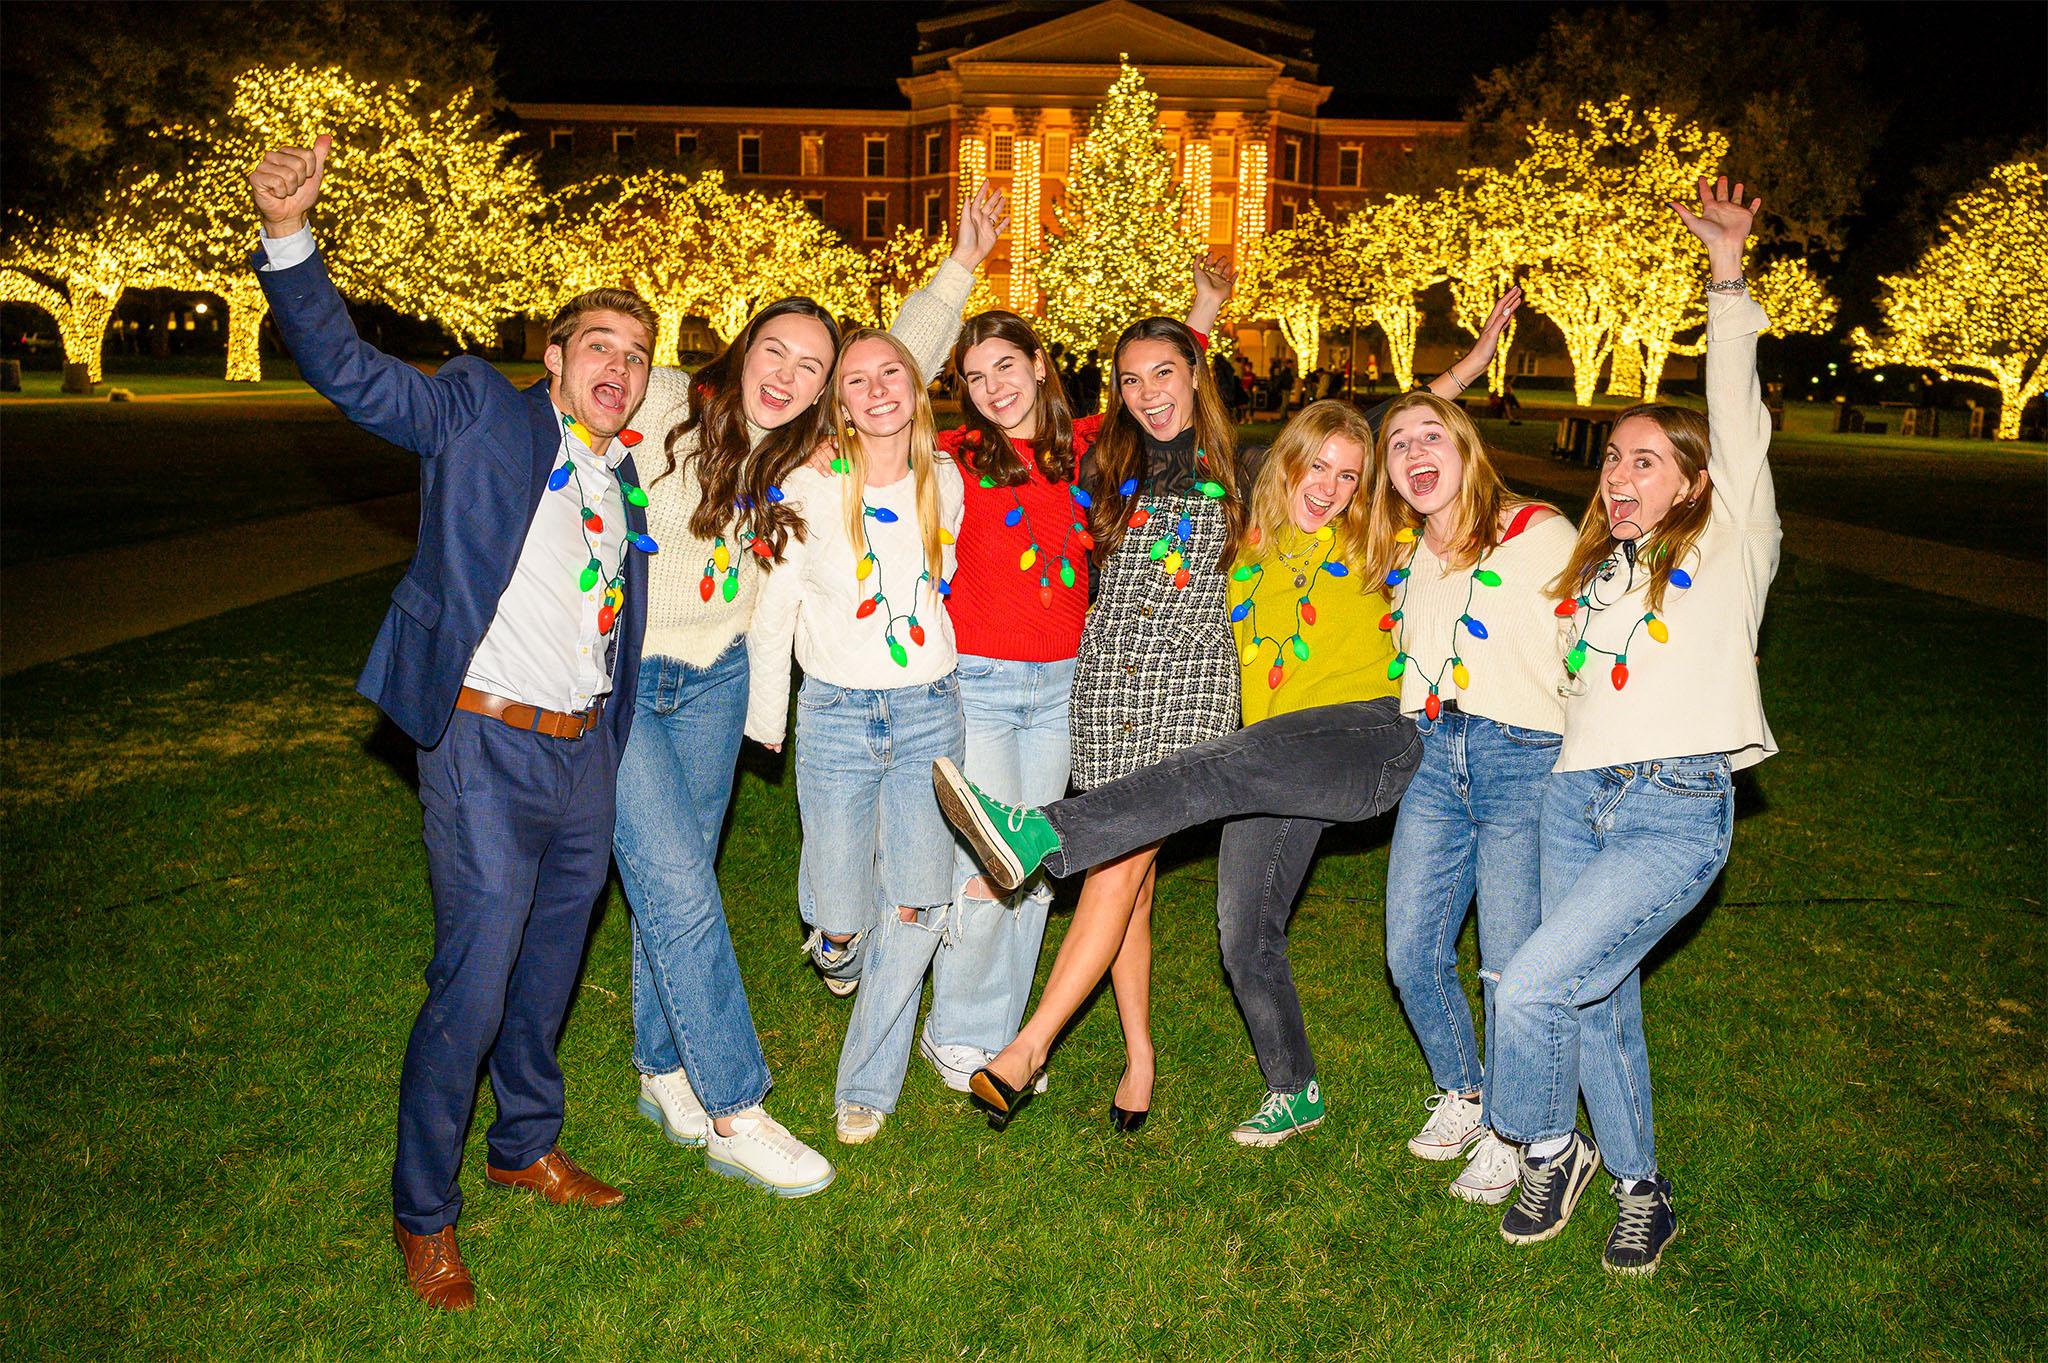 eight students celebration on dallas hall lawn in front of christmas tree at celebration of lights